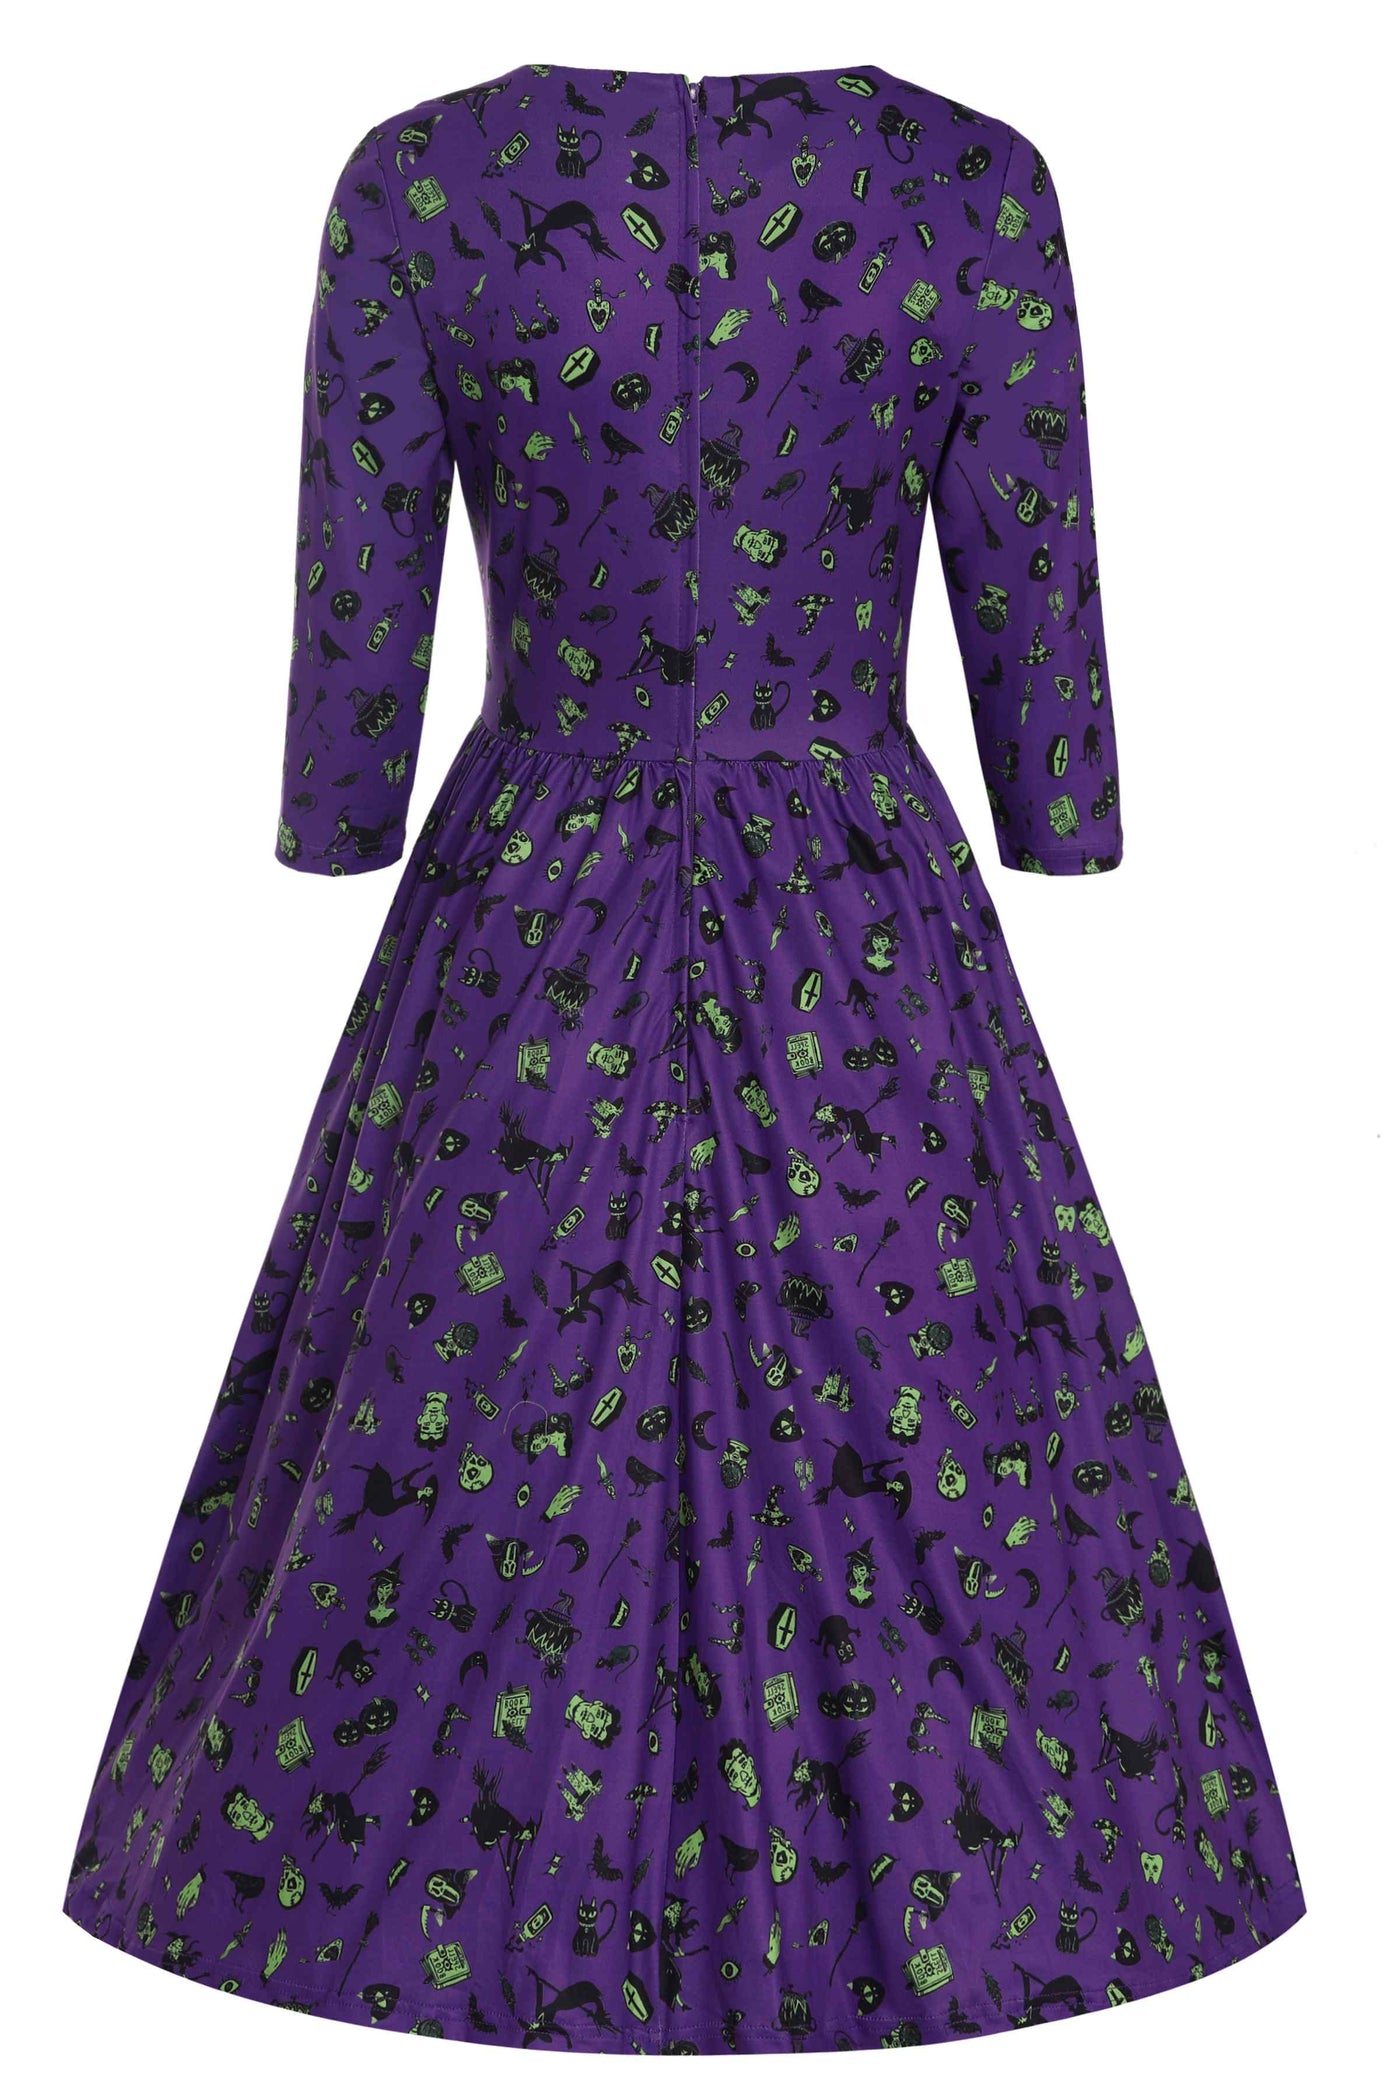 Back View of Wizard and Witch Long Sleeved Swing Dress in Purple